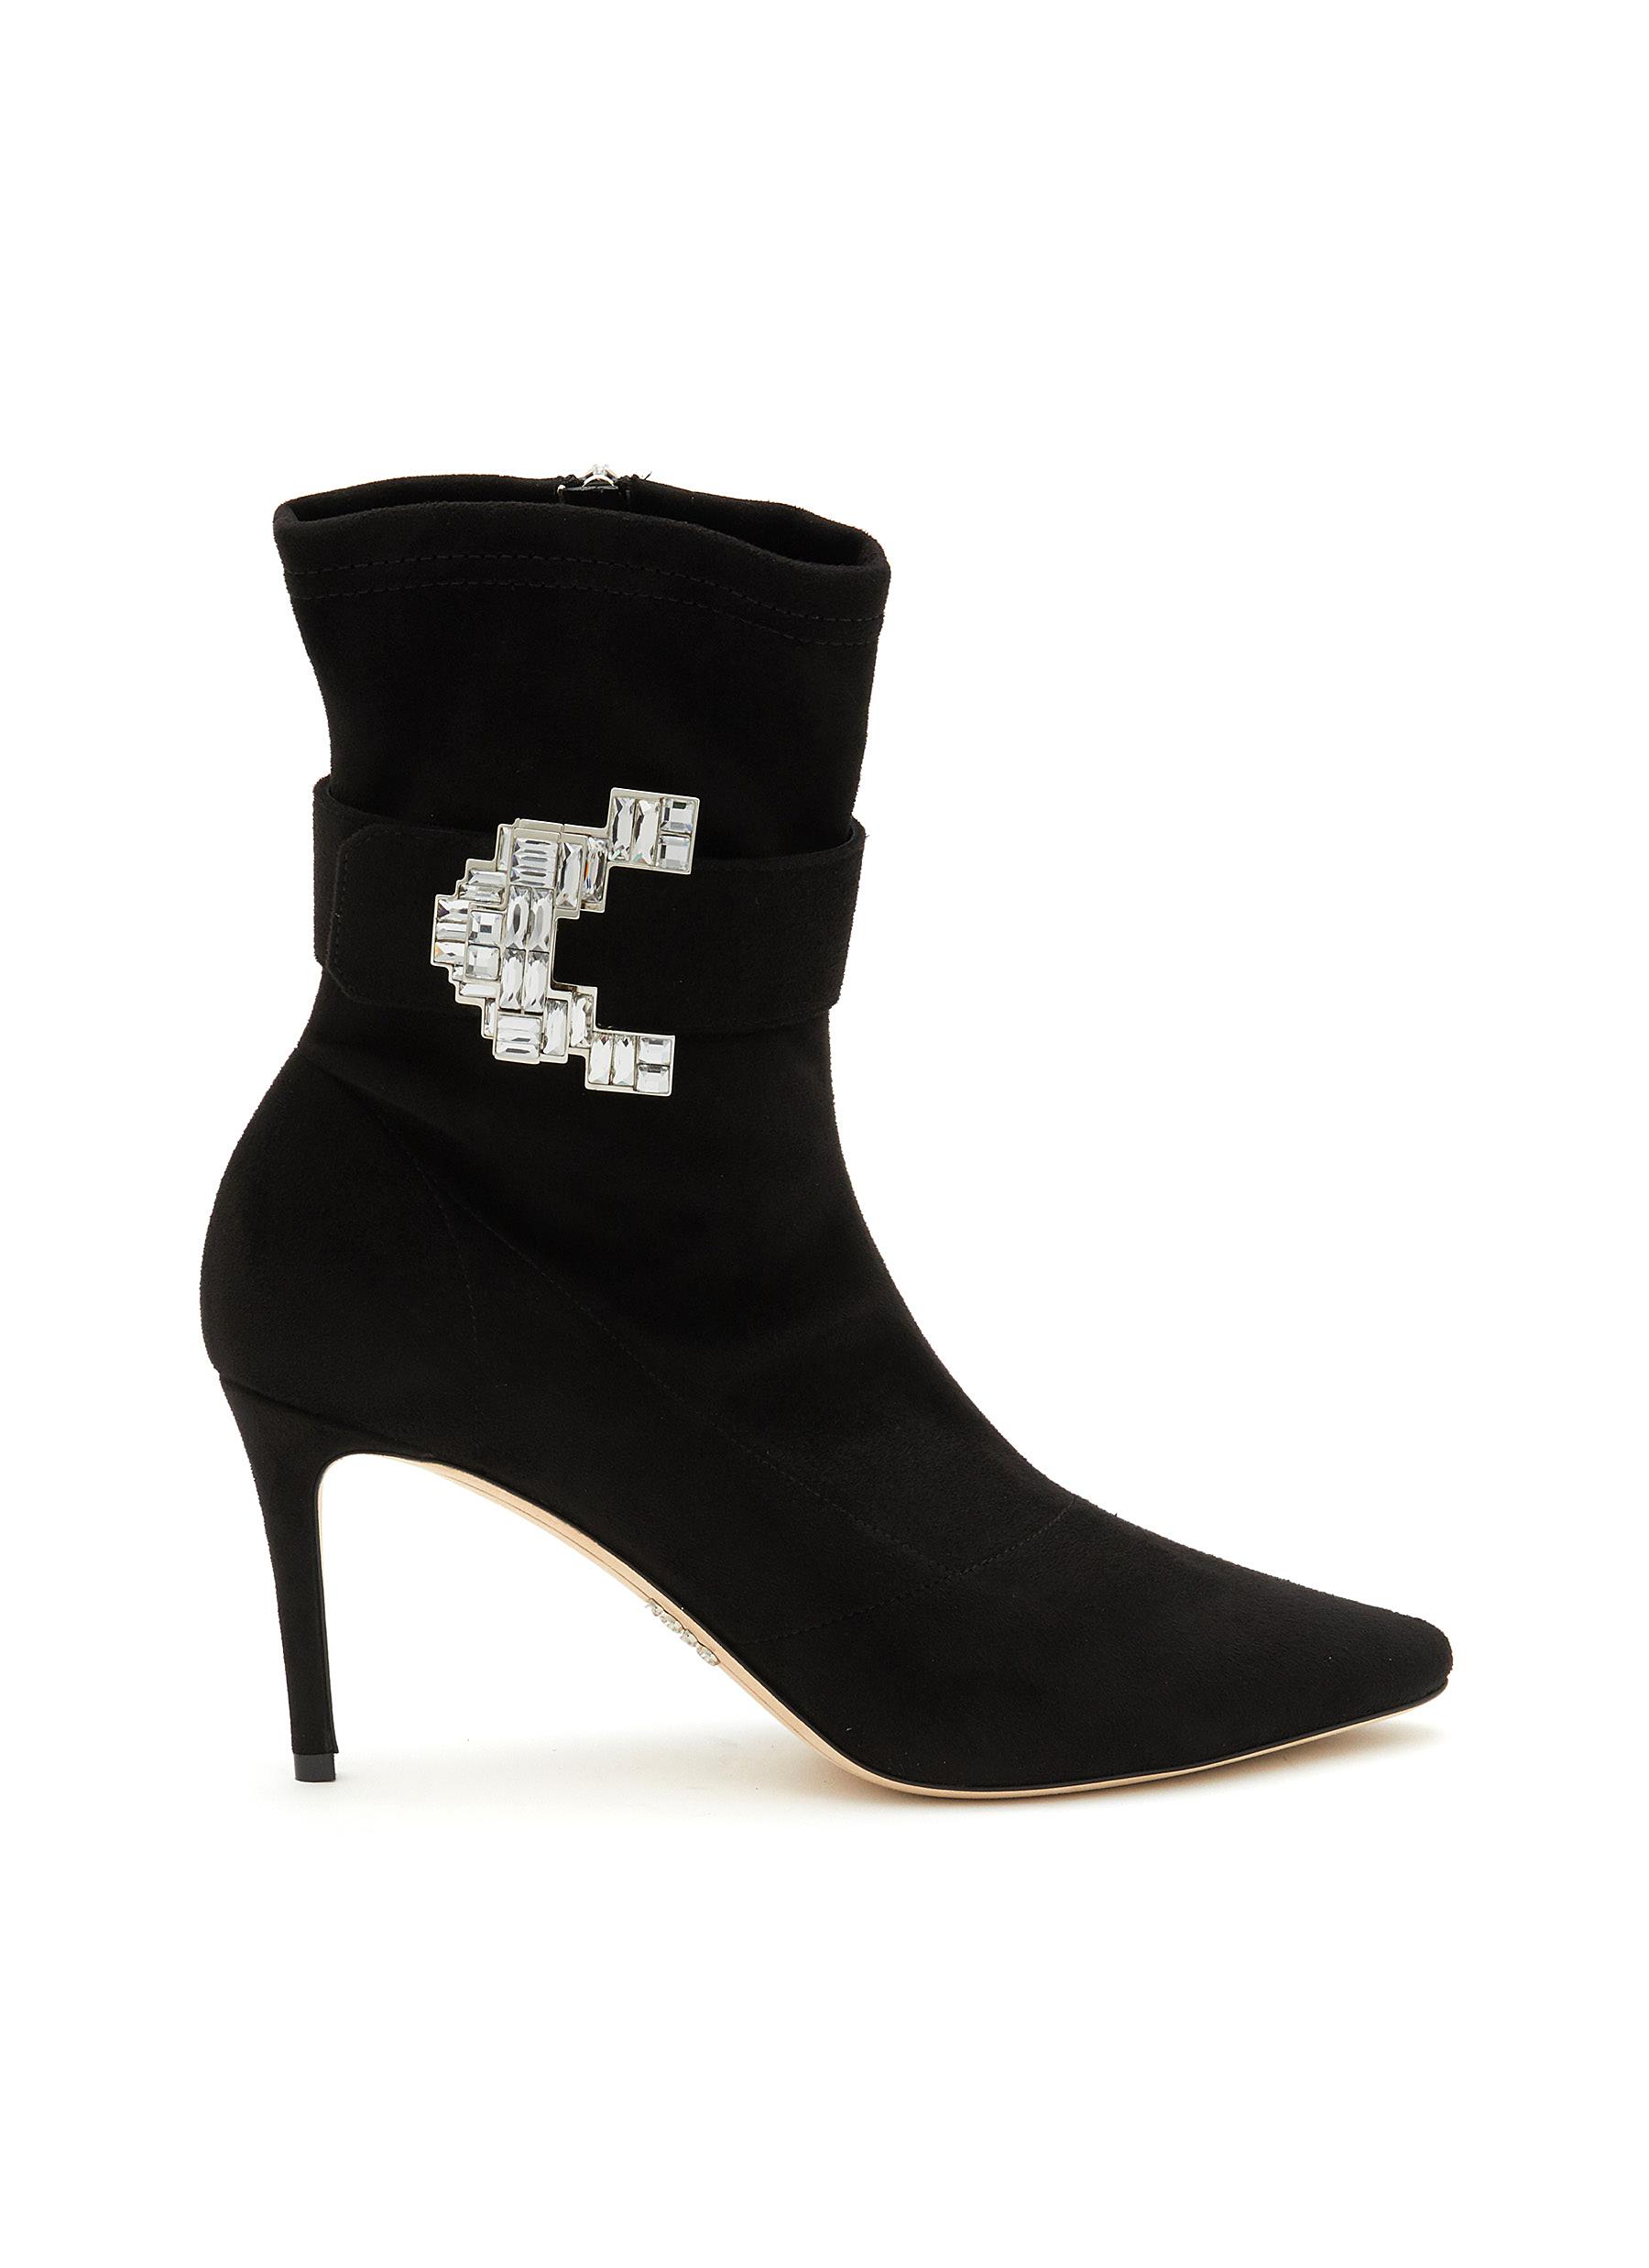 RODO Chloe 80 Crystal Embellished Suede Boots